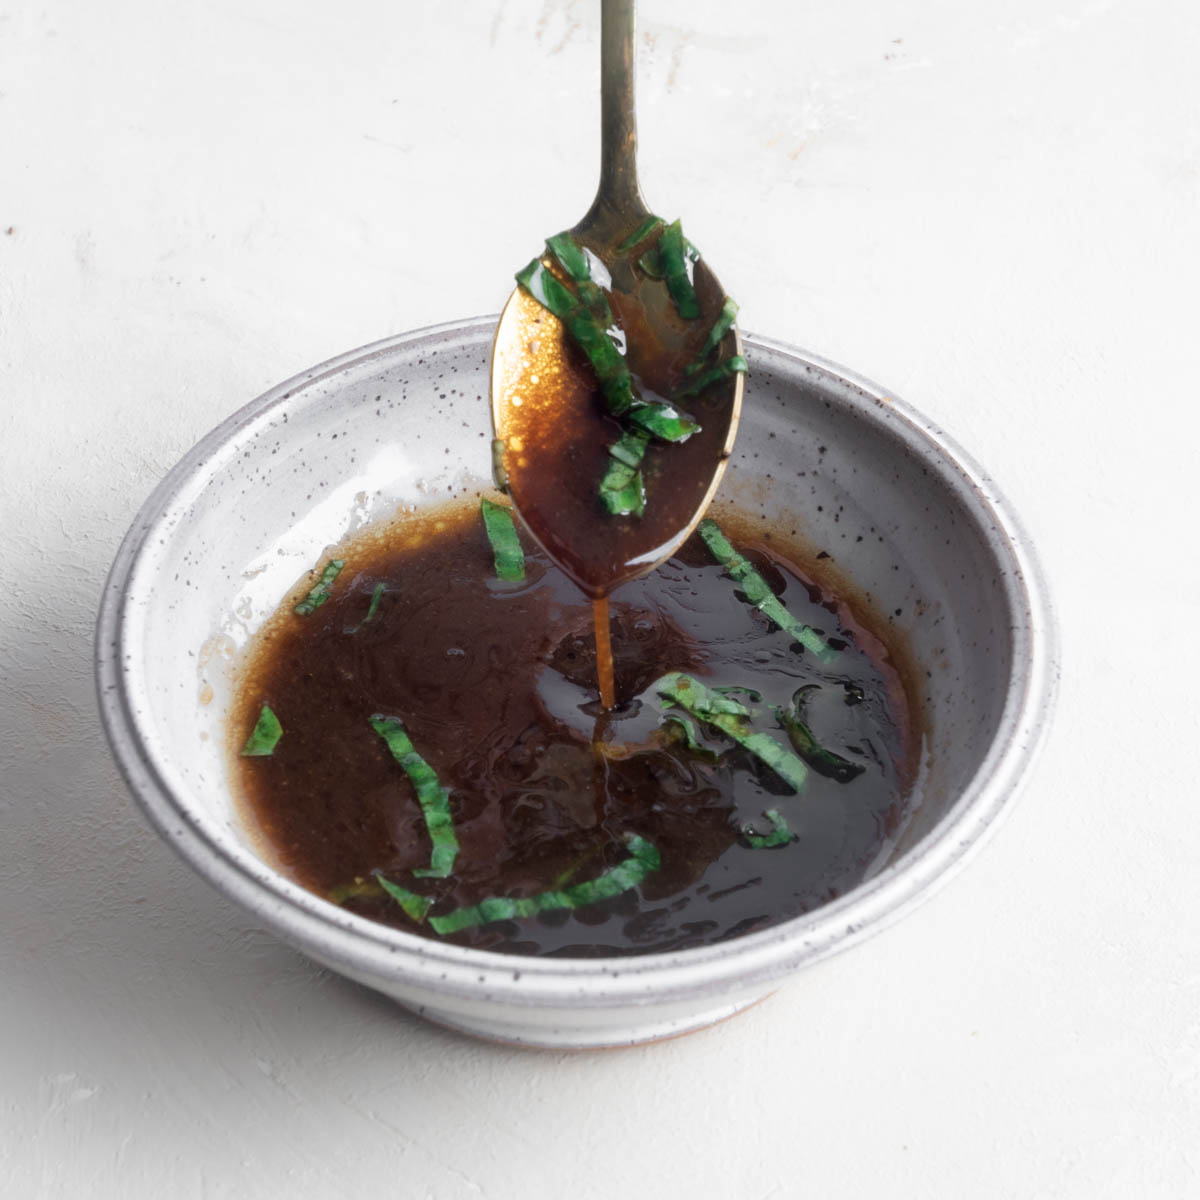 Basil balsamic vinaigrette in a white bowl with a spoon hovering over the deep brown dressing dripping the vinaigrette back into the bowl with julienned basil mixed throughout